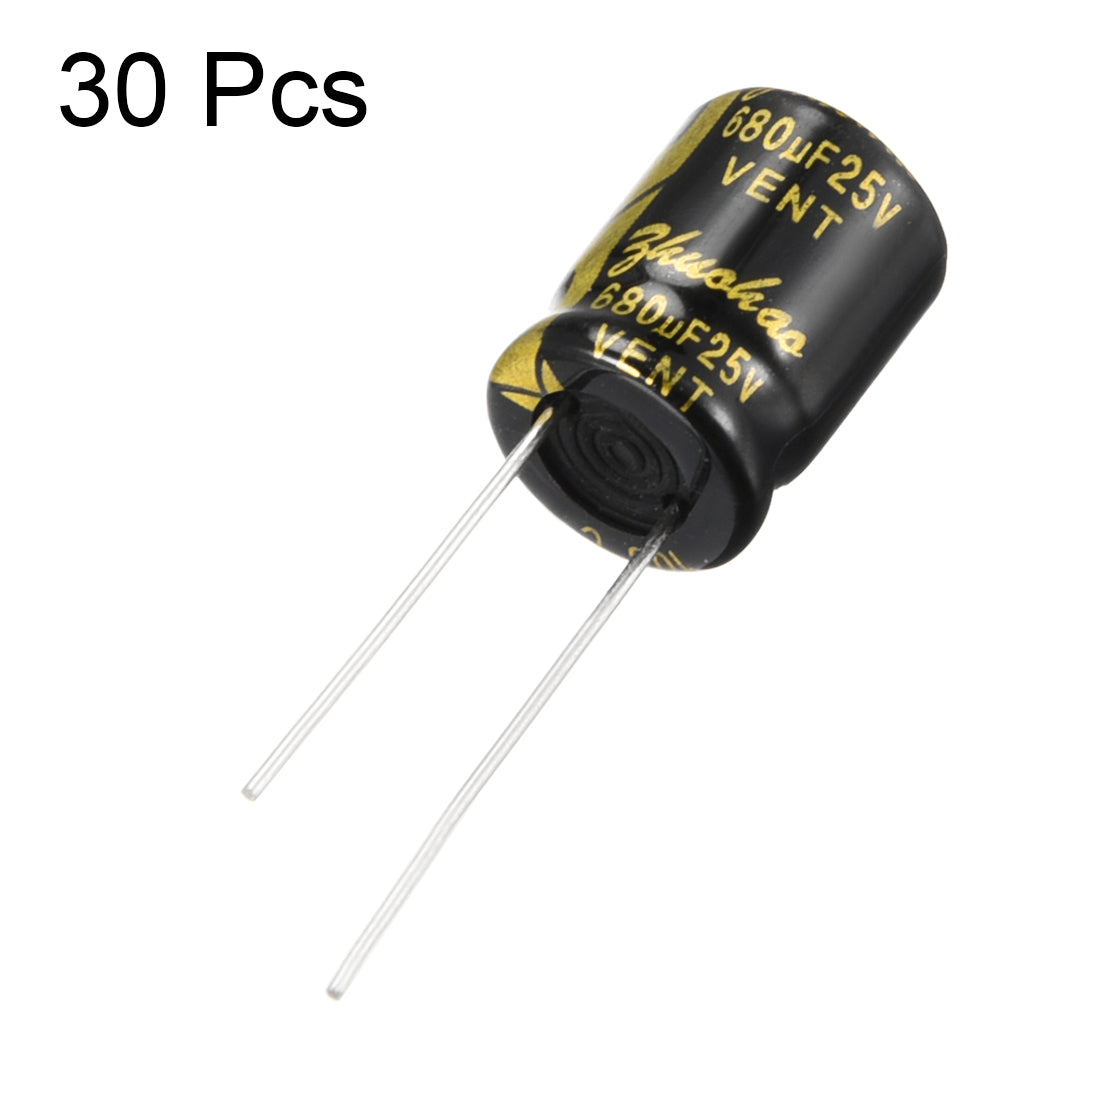 uxcell Uxcell Aluminum Radial Electrolytic Capacitor with 680uF 25V 105 Celsius Life 2000H 10 x 13 mm Black 30pcs